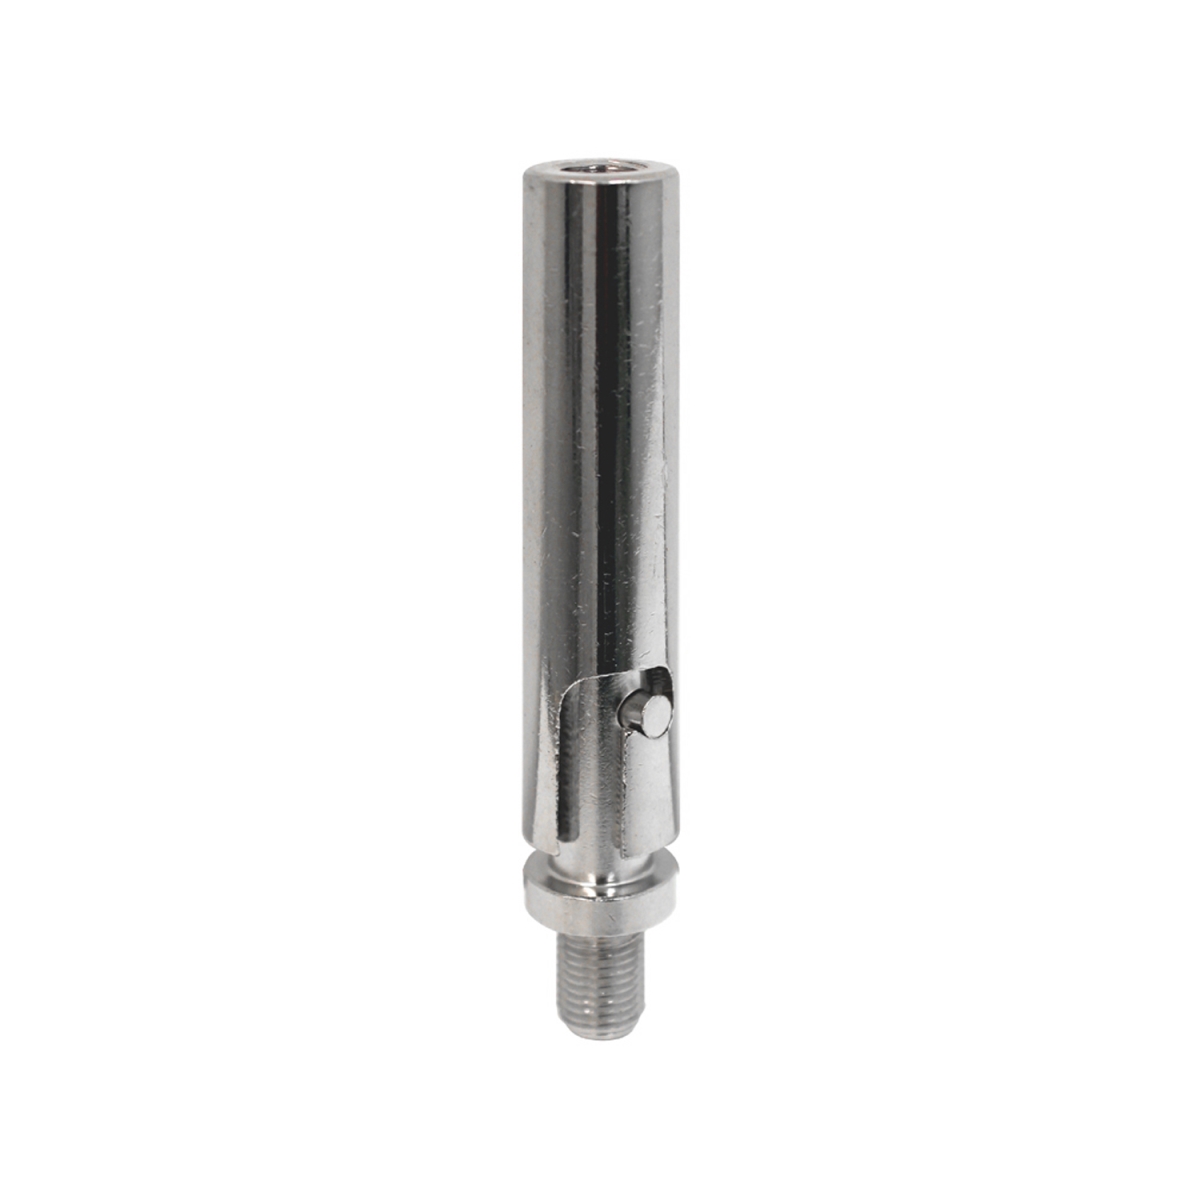 Picture of Procomm K873X 0.375 in.-24 Thread Antenna Quick Disconnect with Locking Pin - Chrome Plated